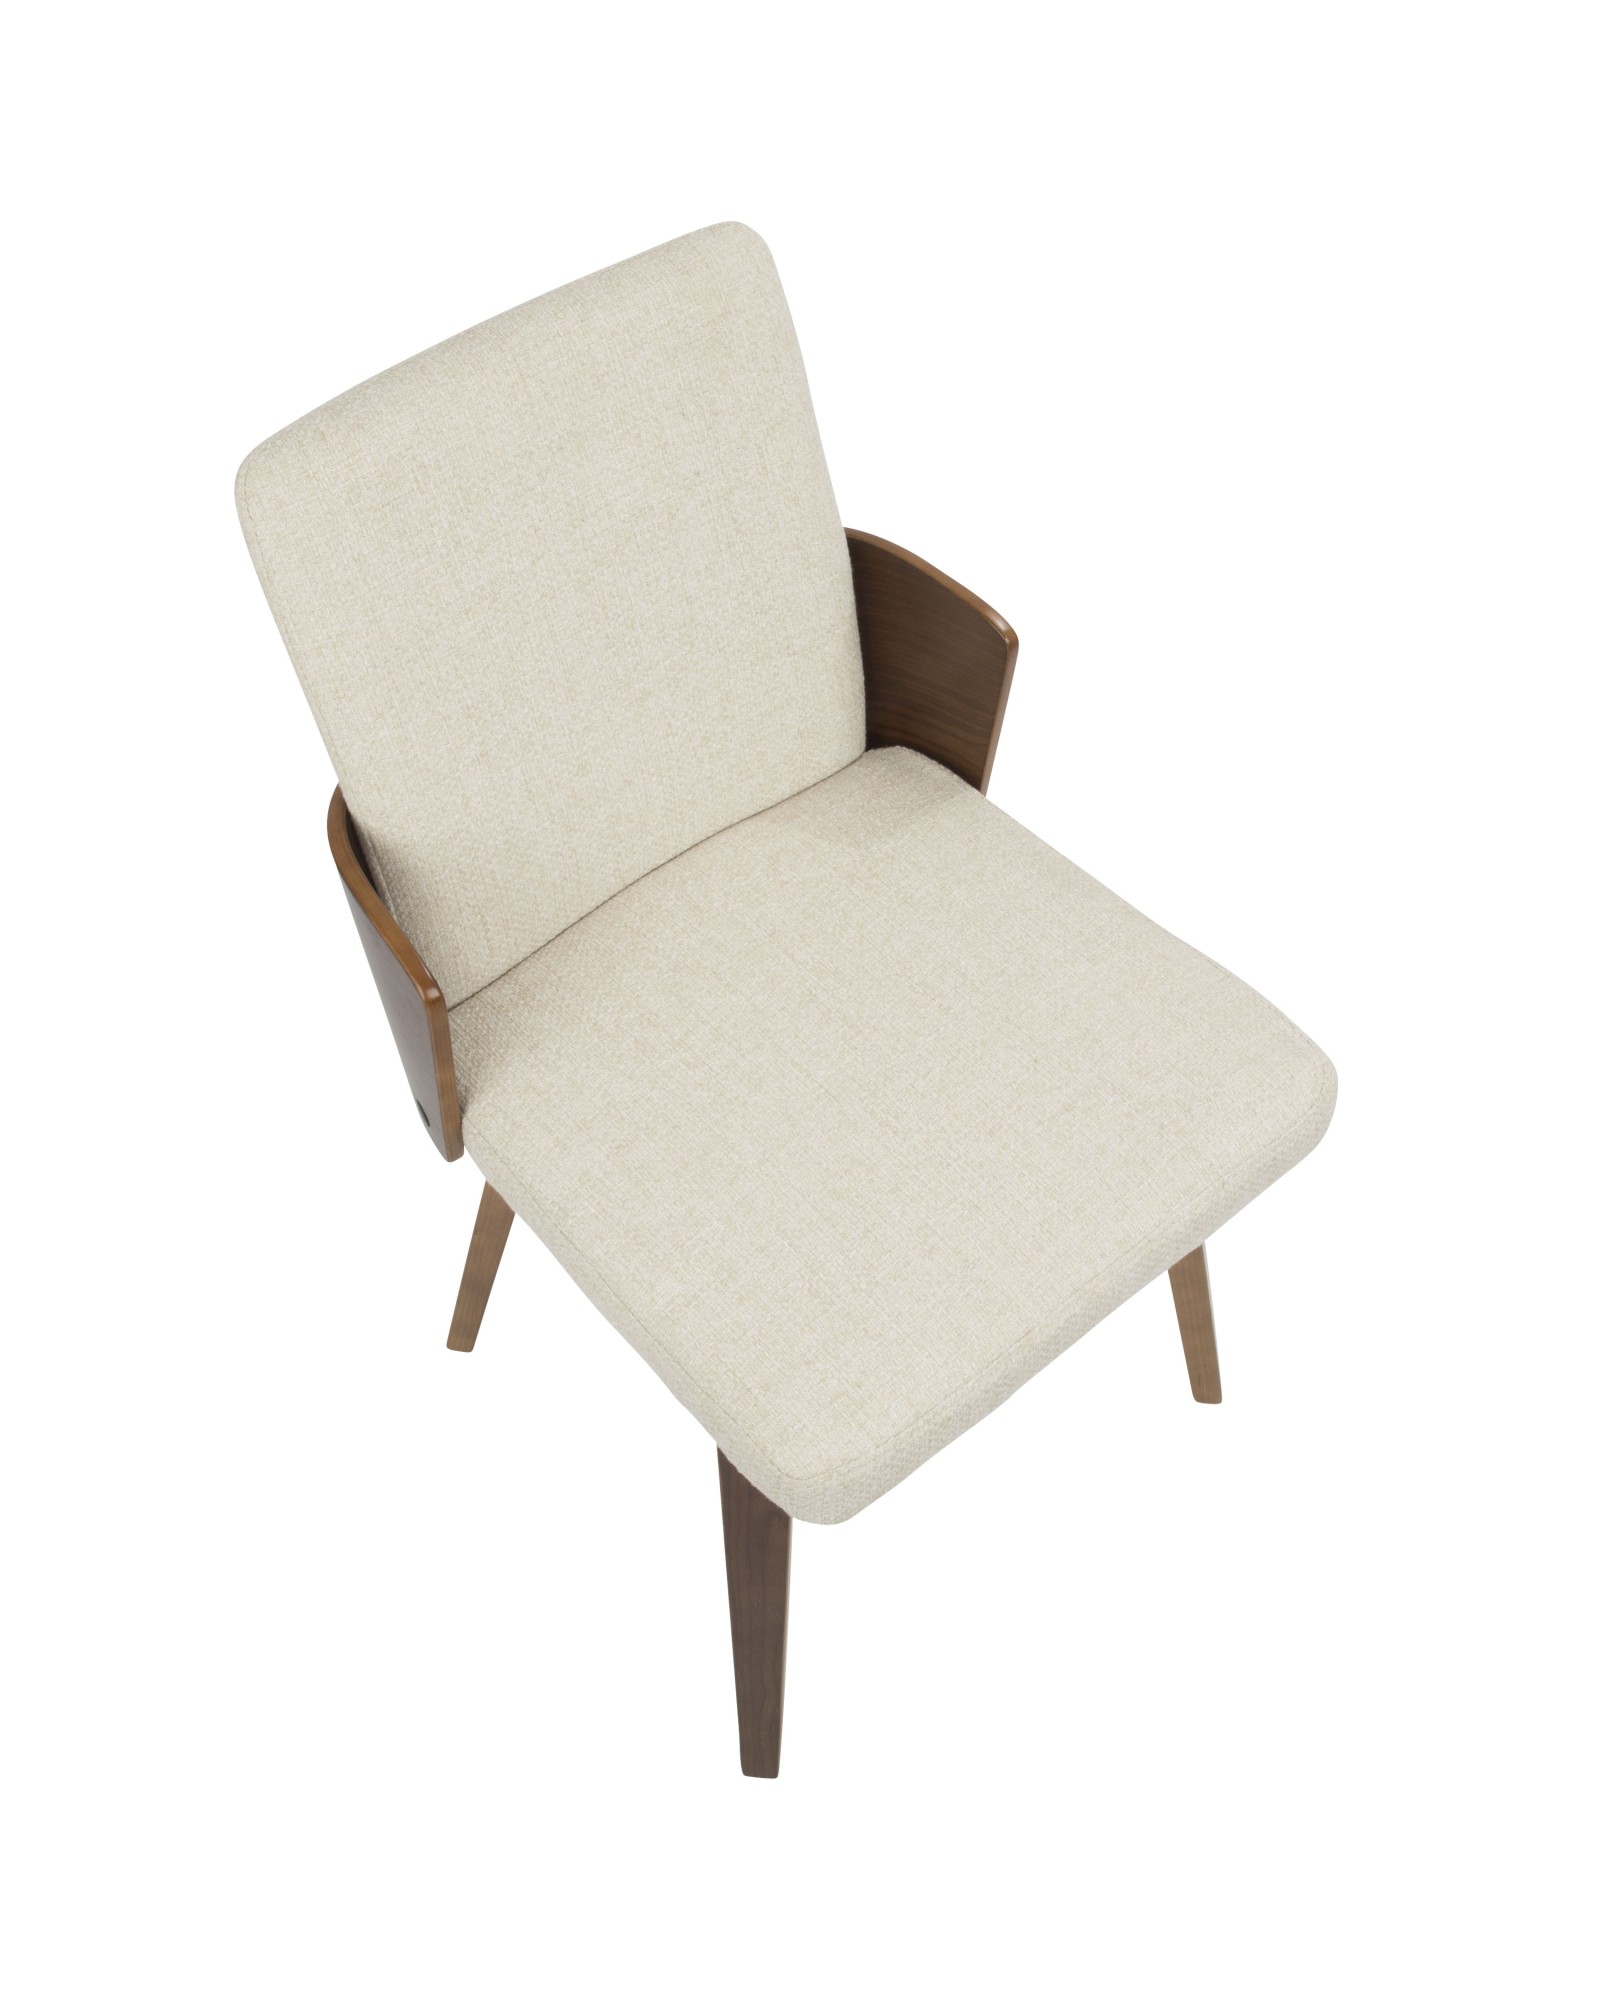 Carmella Mid-Century Modern Dining/Accent Chair in Walnut and Cream Fabric - Set of 2